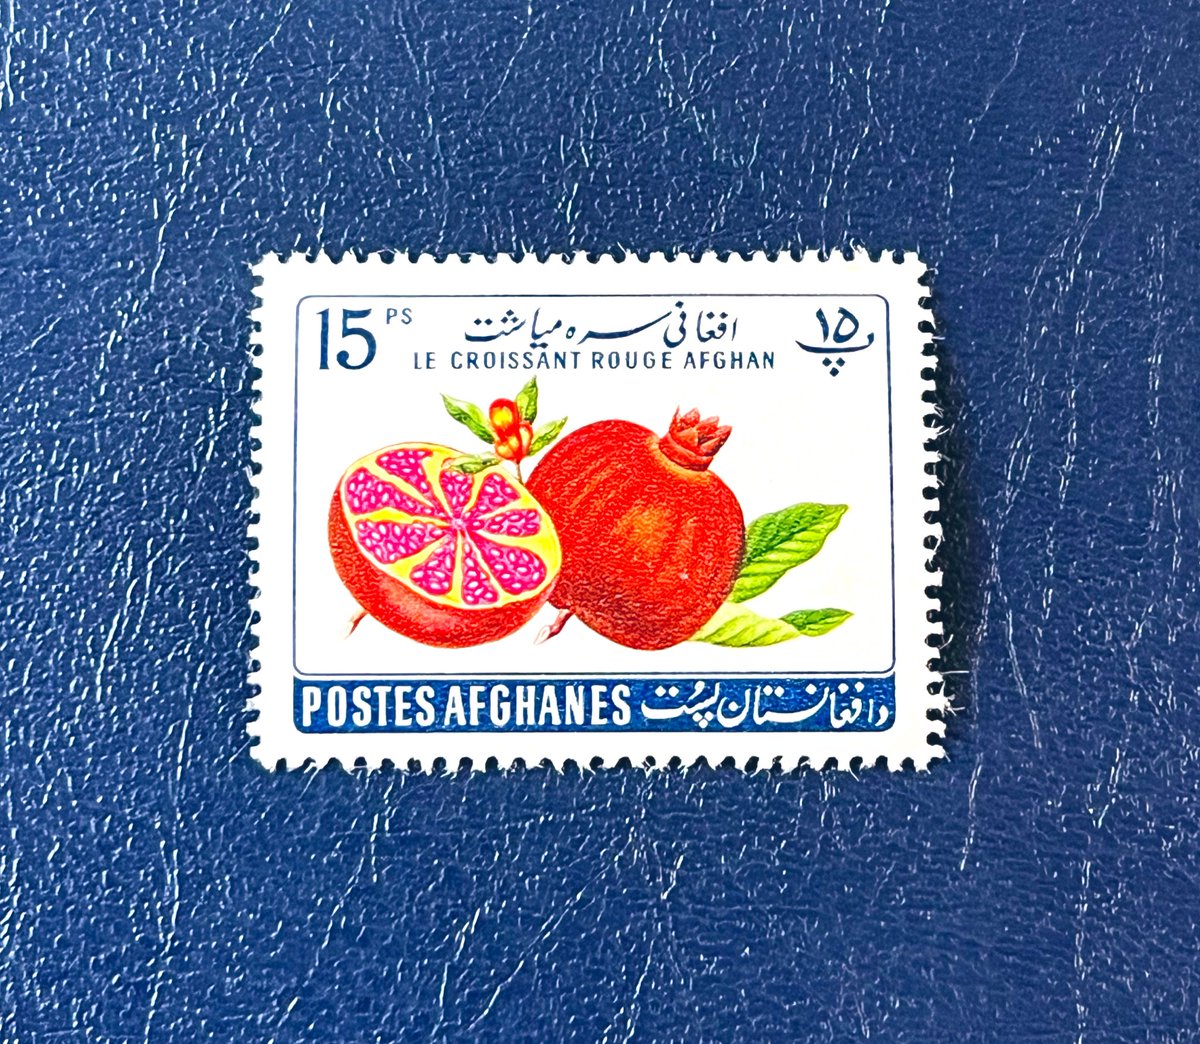 Good morning everybody. I hope you’re all well. Today’s Stamp of the Day, is this 15 pul stamp from Afghanistan.

Issued - 1961
Type - Commemorative 
Print Method - Photogravure 

Please share your stamps from 🇦🇫 and enjoy your day.
#stampcollecting #philately #stamps